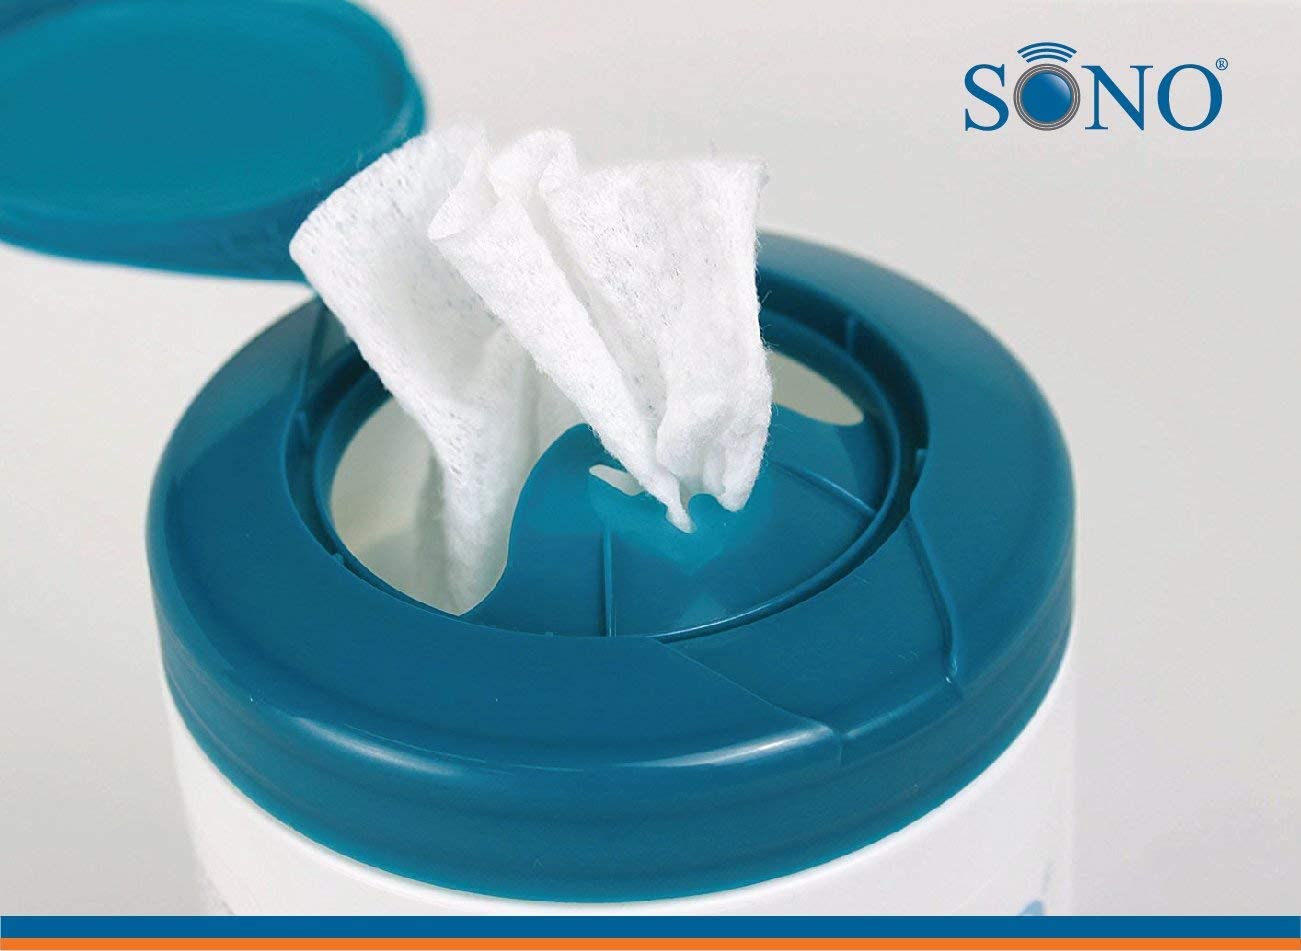 SONO4032 SONO® Healthcare USA made disinfectant surface wipes in 80 count canister